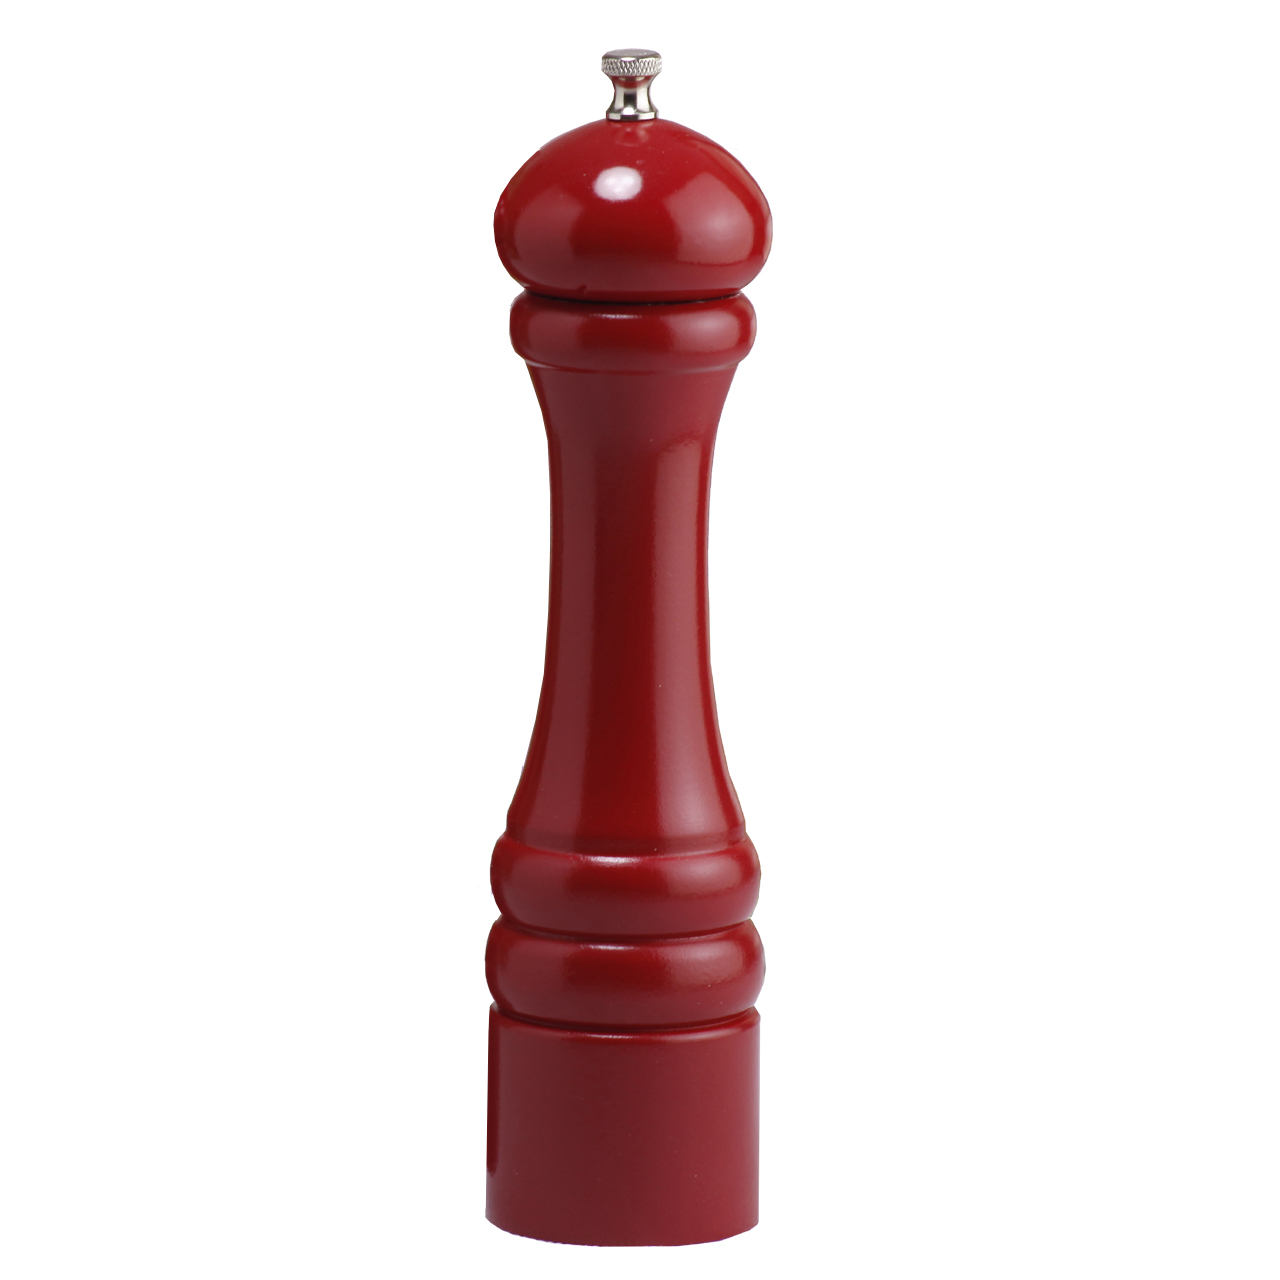 - 10652 - Salt Mill - 10 Inch - Candy Apple Red